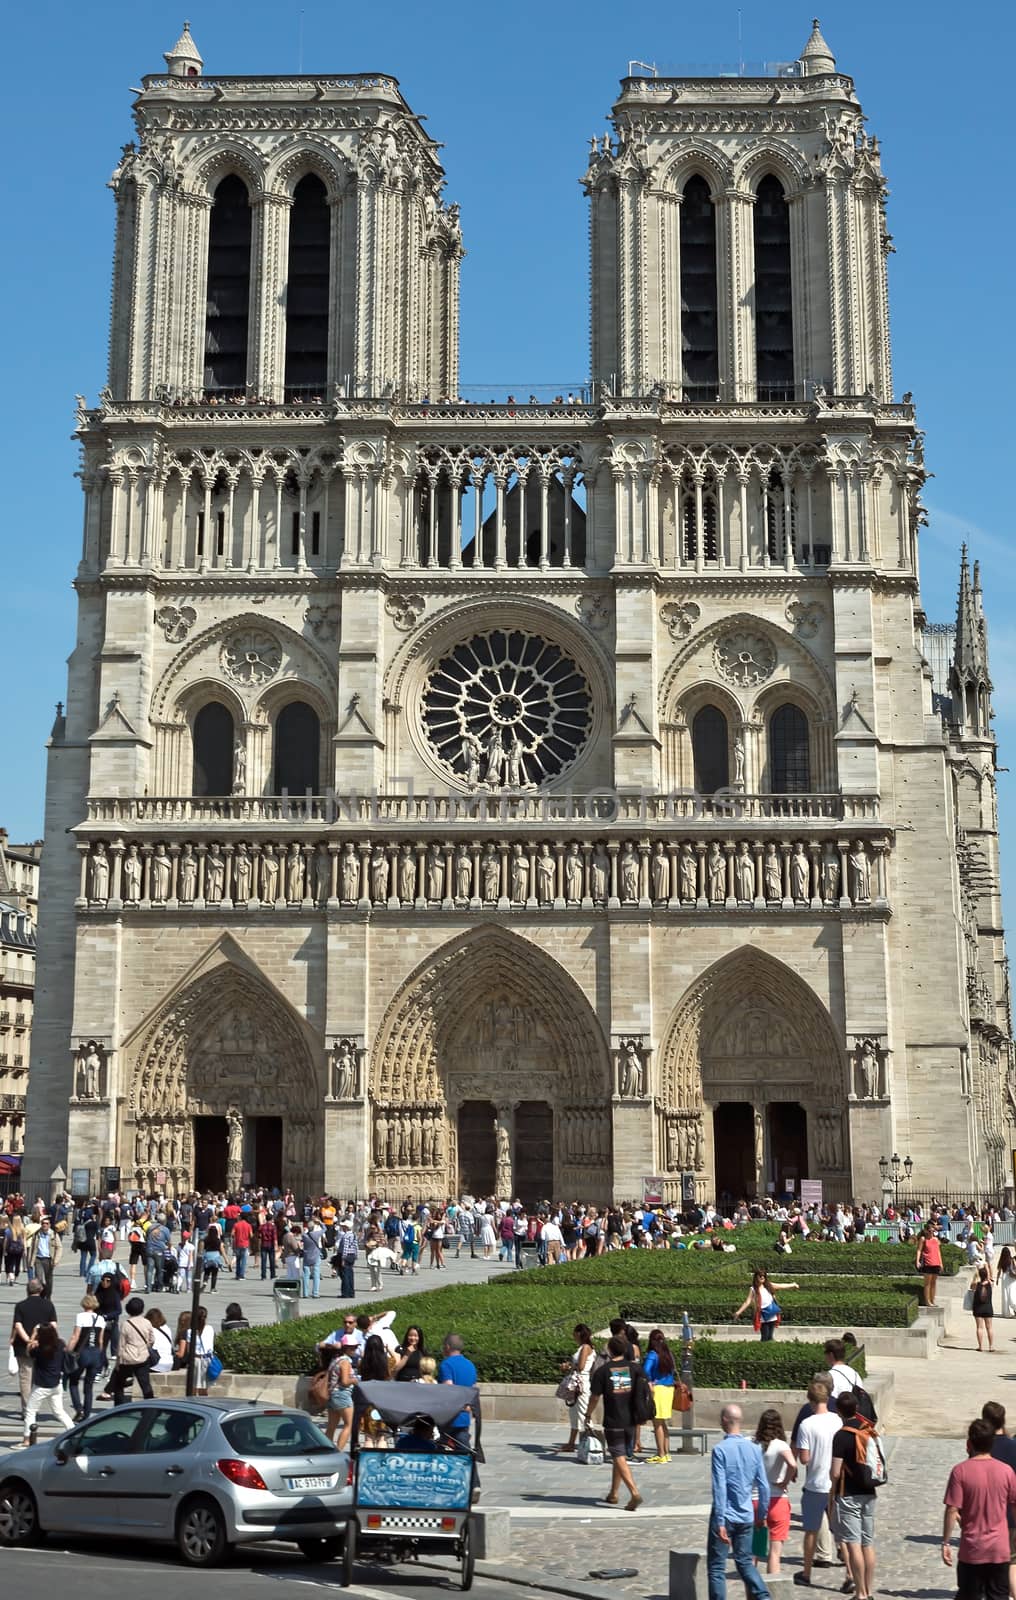 PARIS, FRANCE - JUNE 11, 2014: View of the Cathedral of Notre Dame in Paris, France.

Paris, France - June 11, 2014: View of the Cathedral of Notre Dame in Paris, France. People are visiting Cathedral.